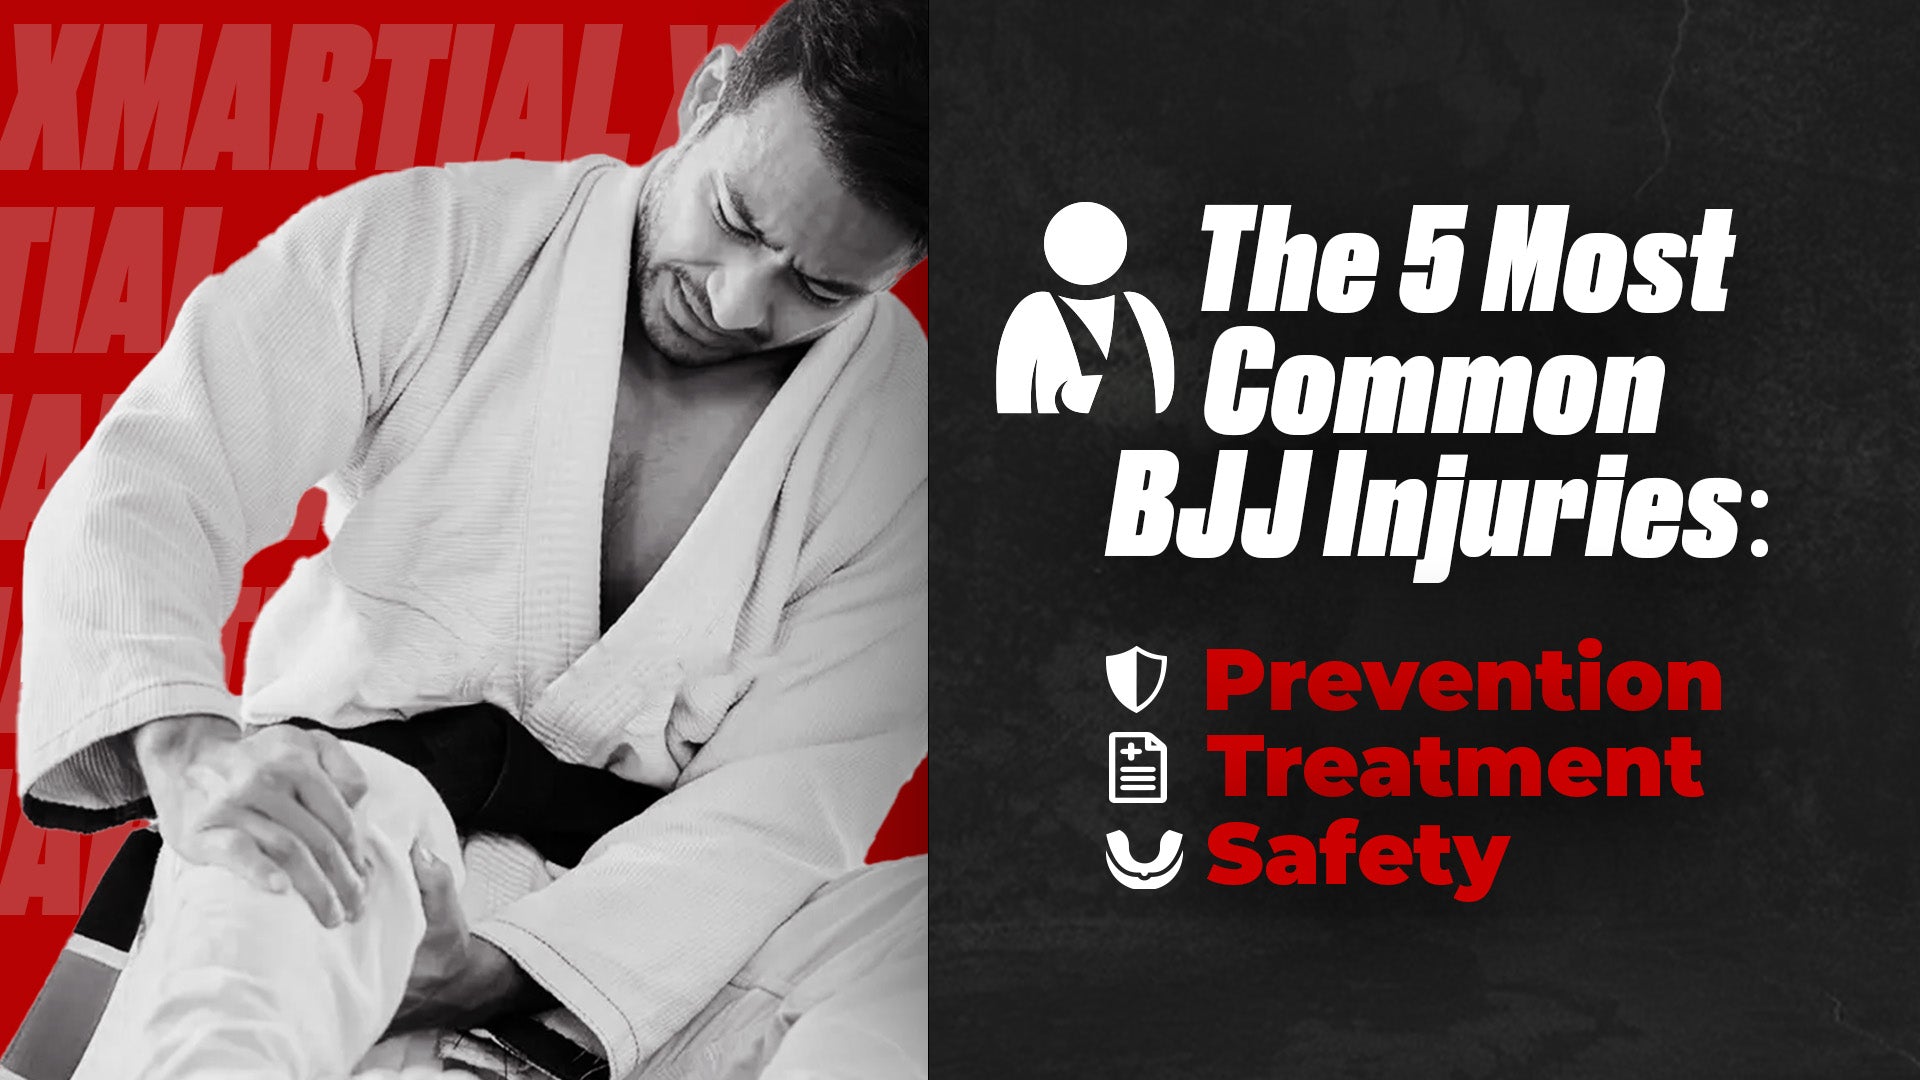 The 5 Most Common BJJ Injuries: Prevention, Treatment, and Safety